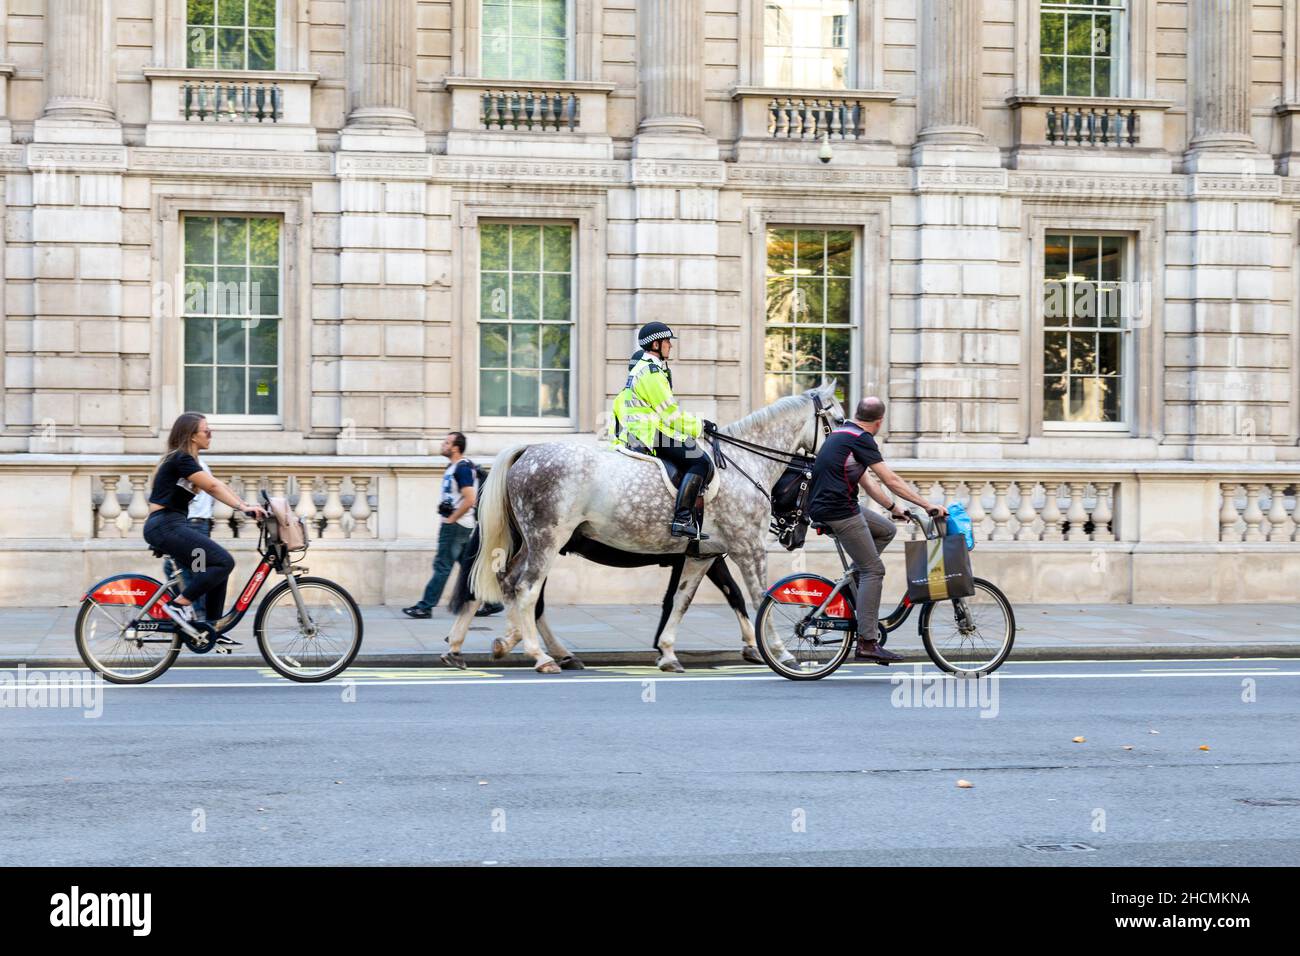 Police officers on horses and cyclists on hire Santander bikes riding in Whitehall, London, UK Stock Photo